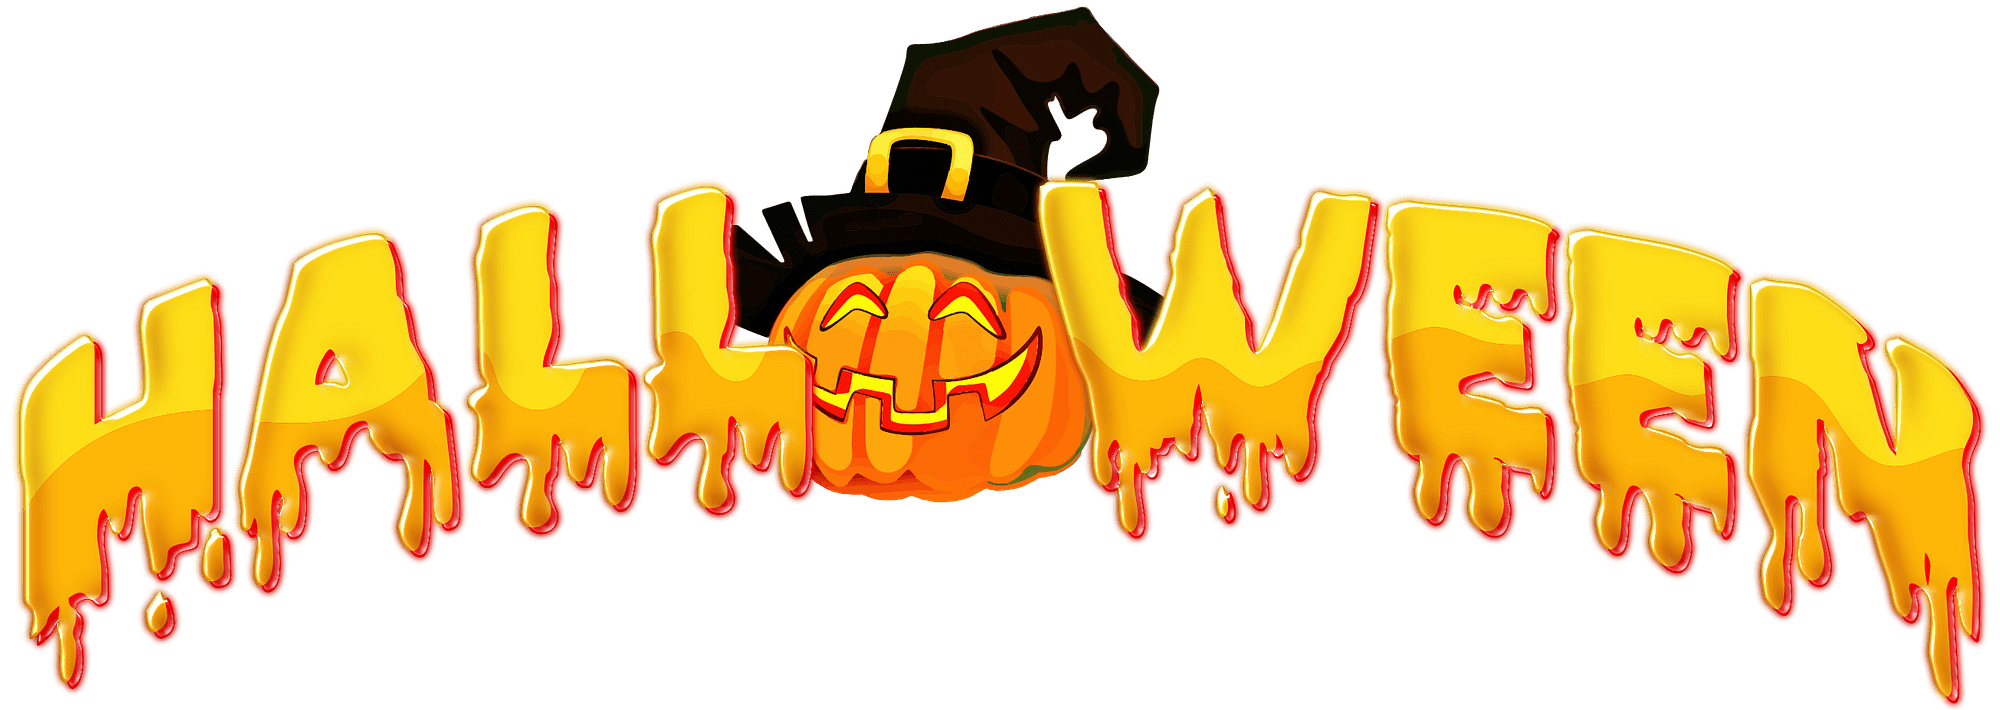 Halloween Pictures PNG Background